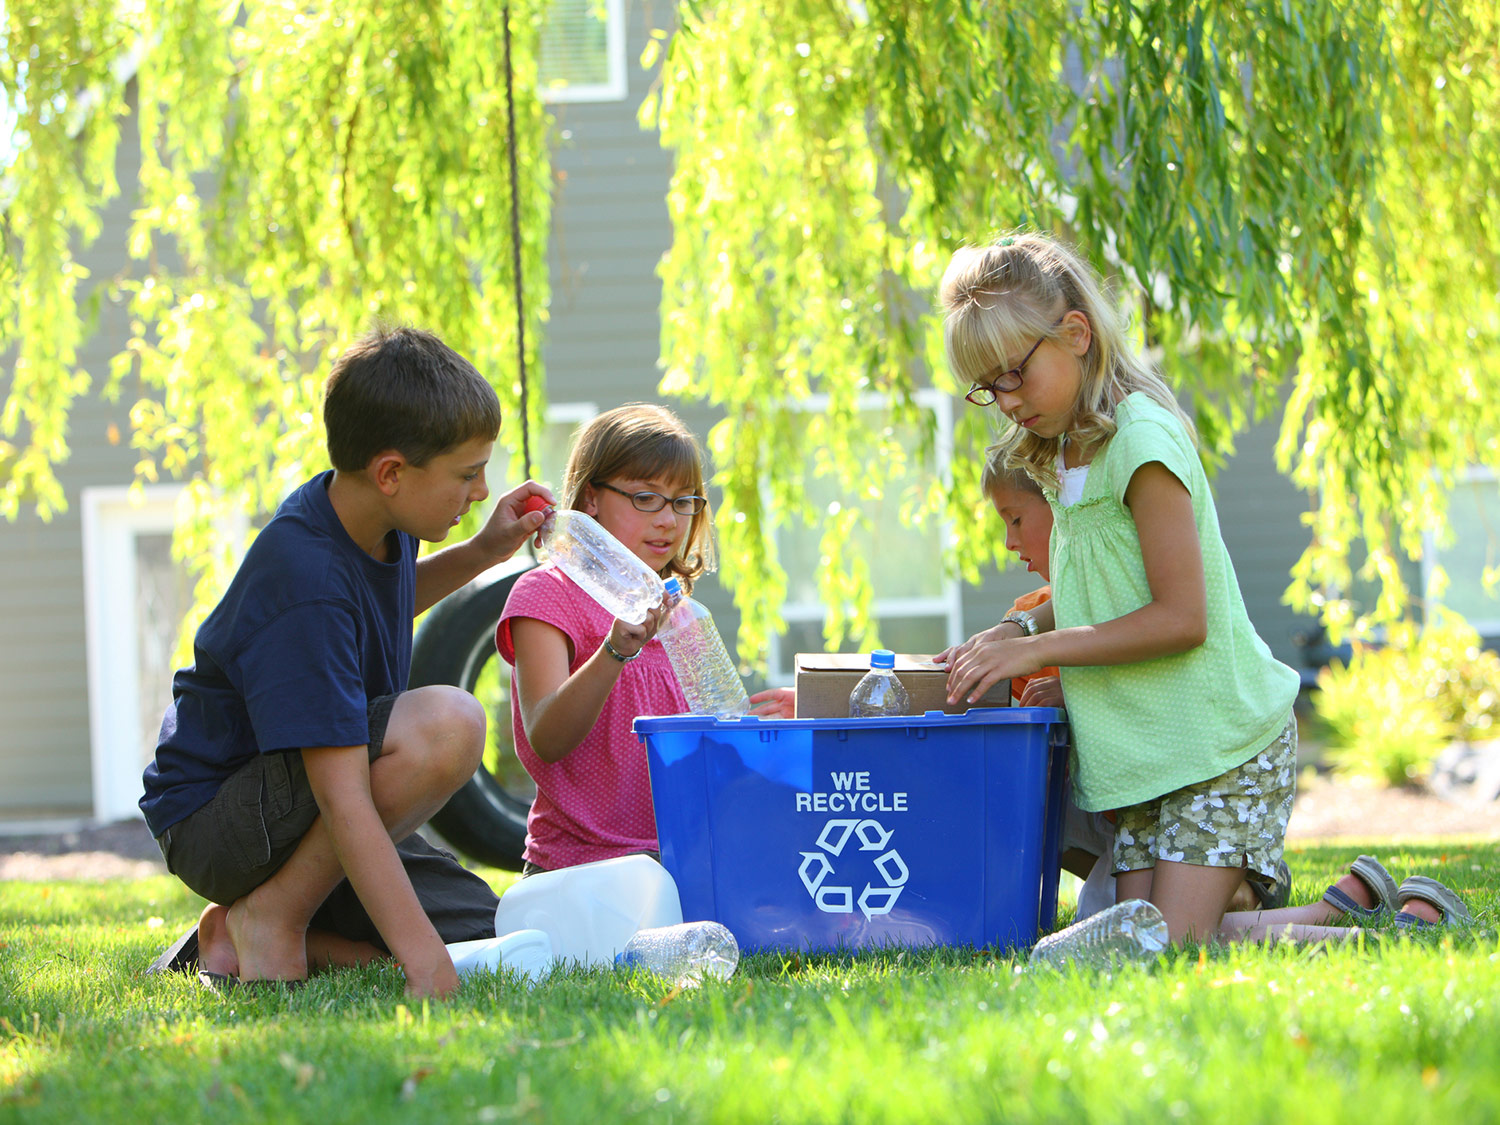 Some children recycling the garbage